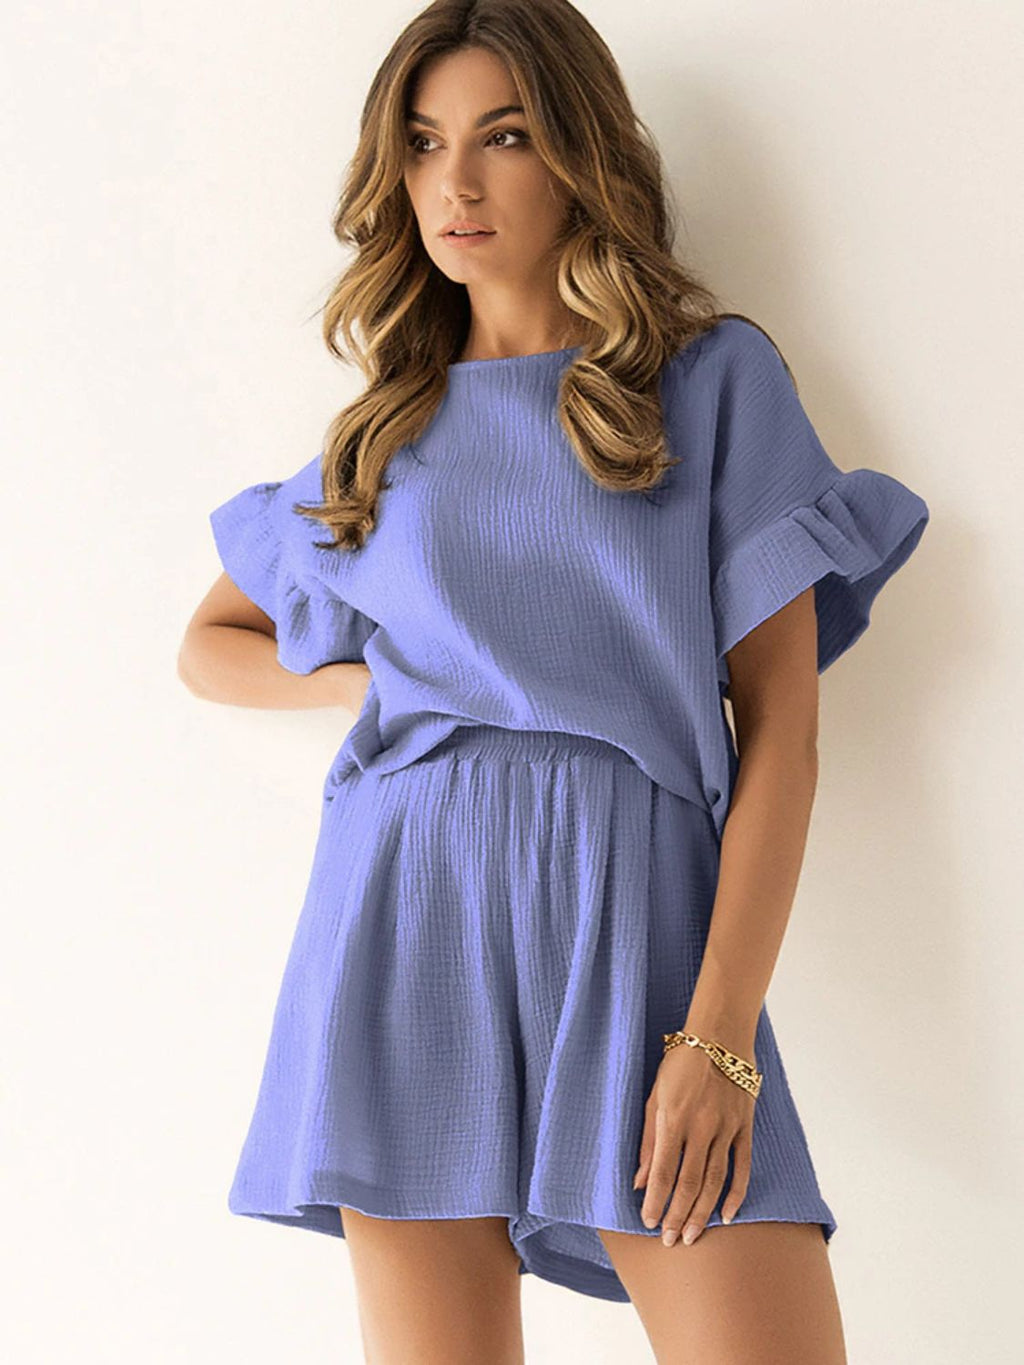 Ruffled Round Neck Top and Shorts Set